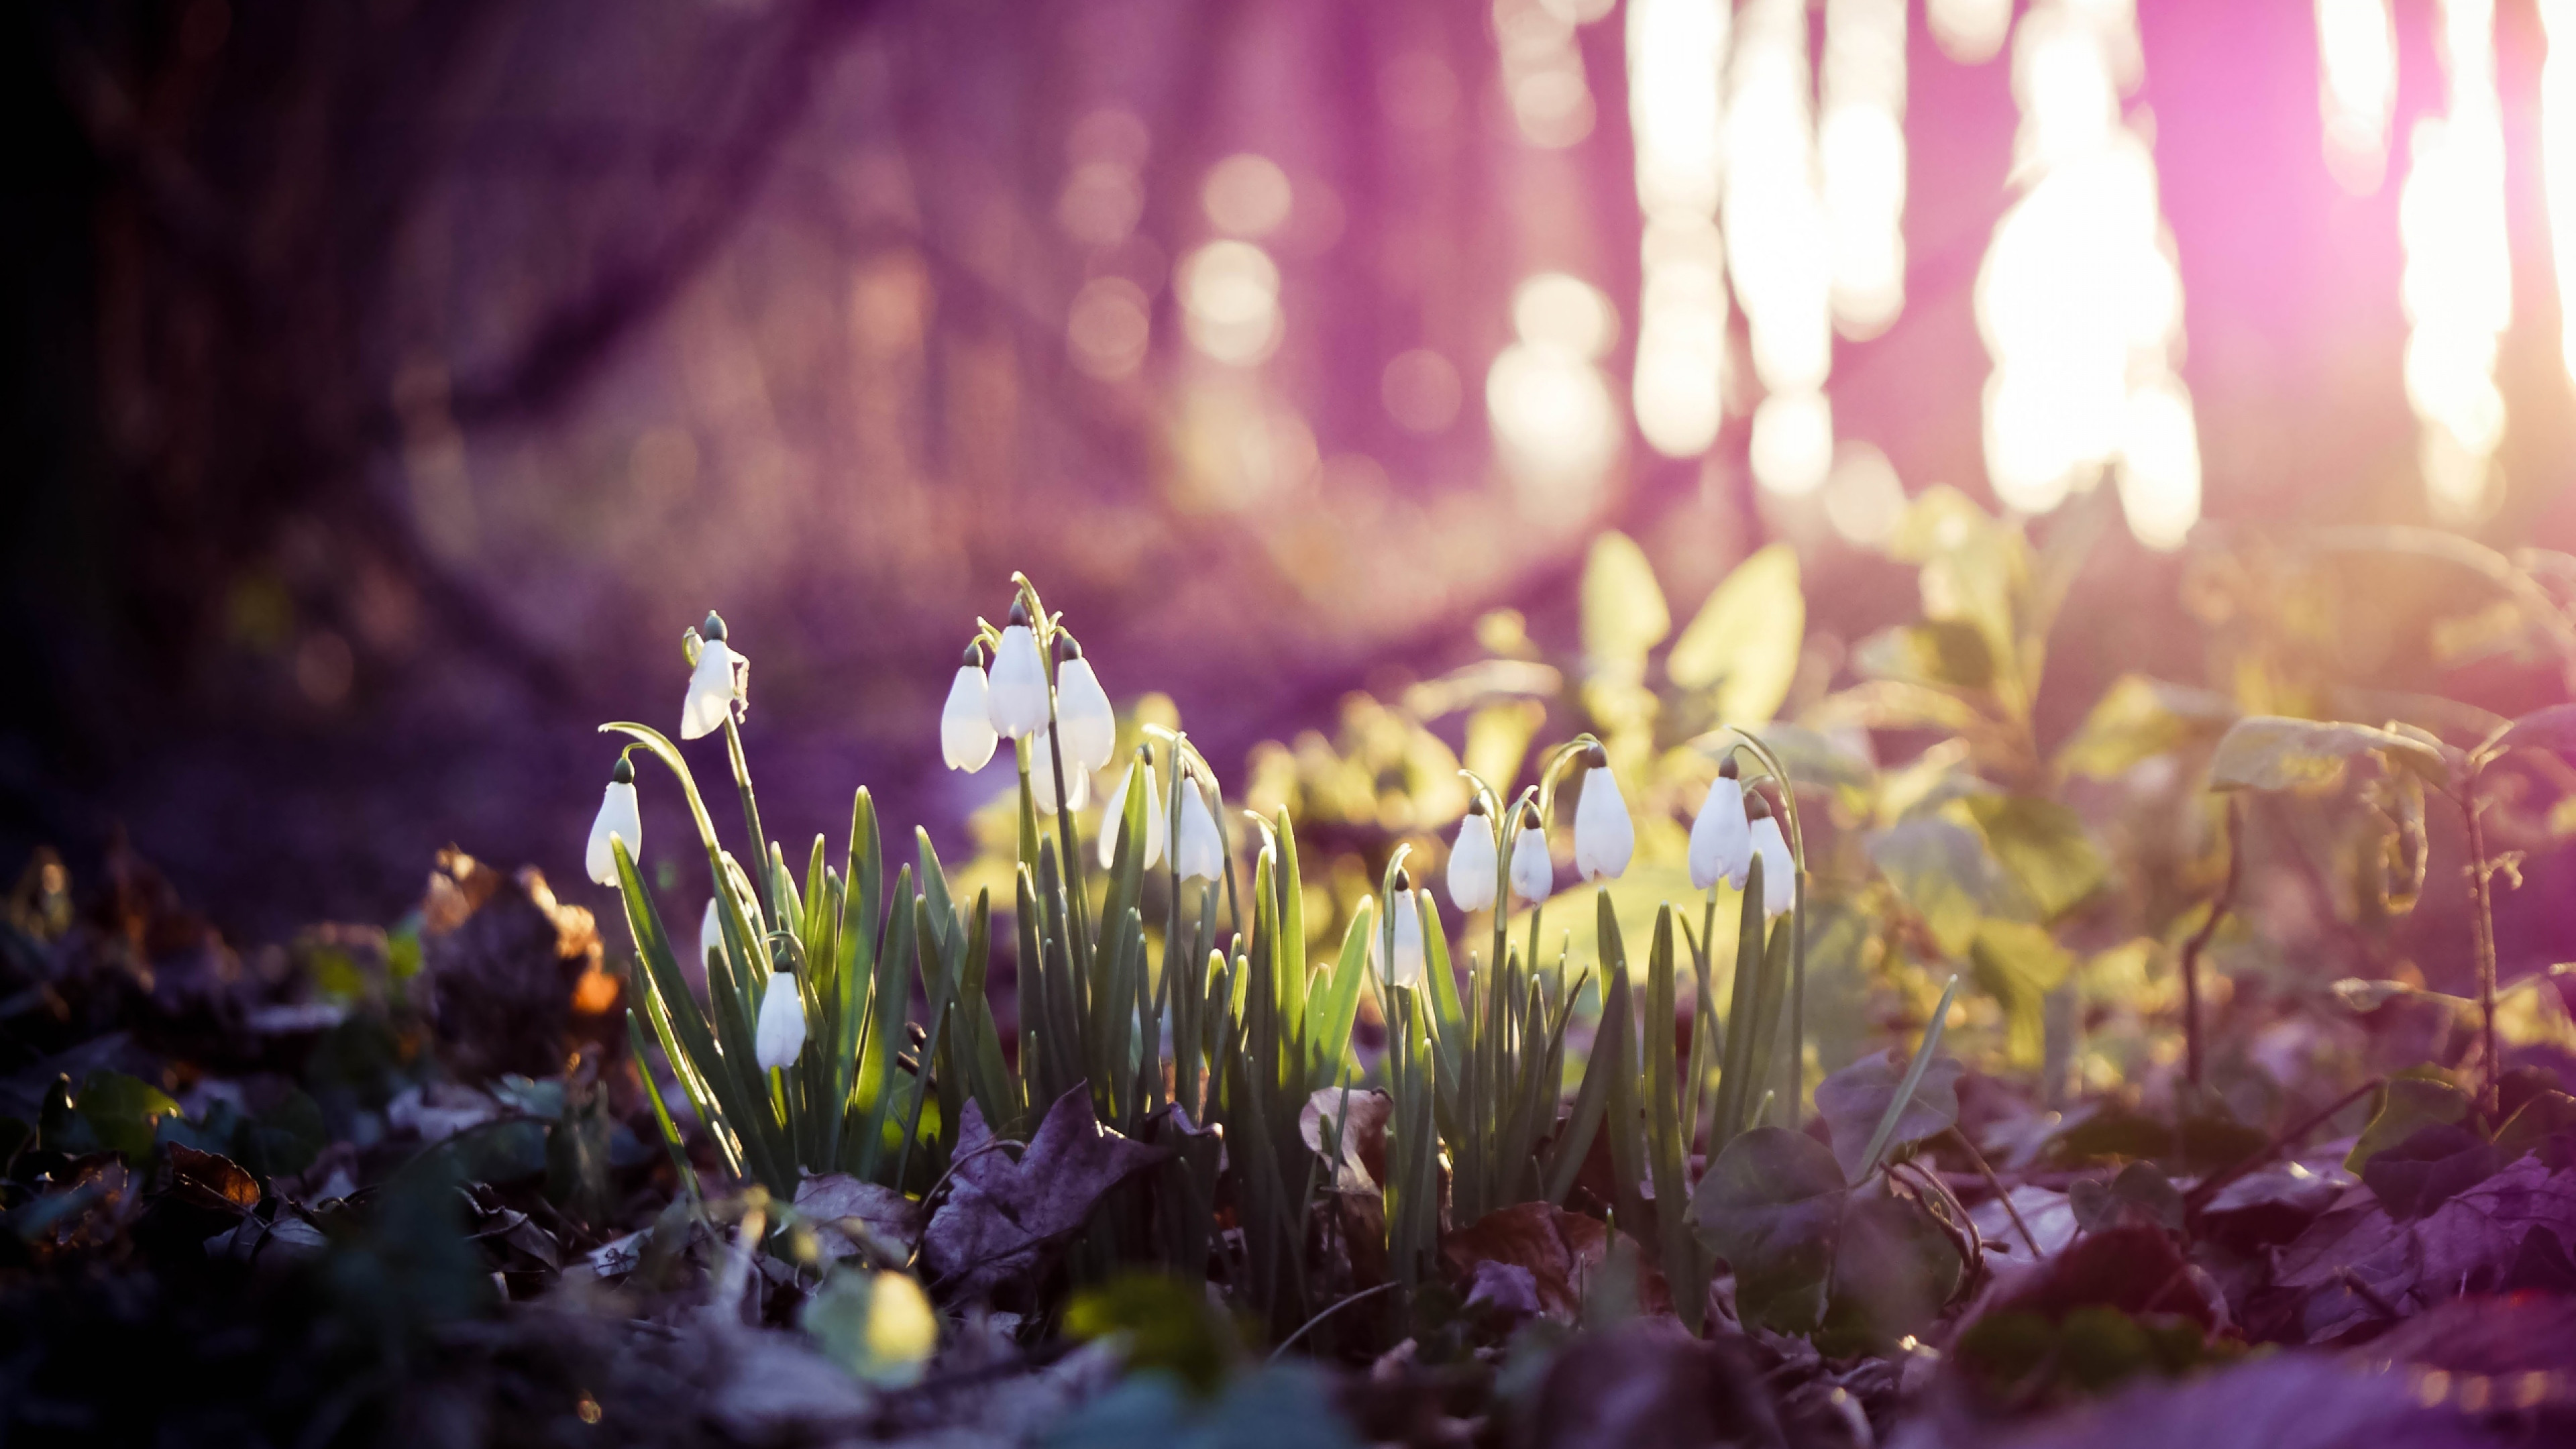 flower background hd  Early spring flowers Spring flowers wallpaper  Spring flowers